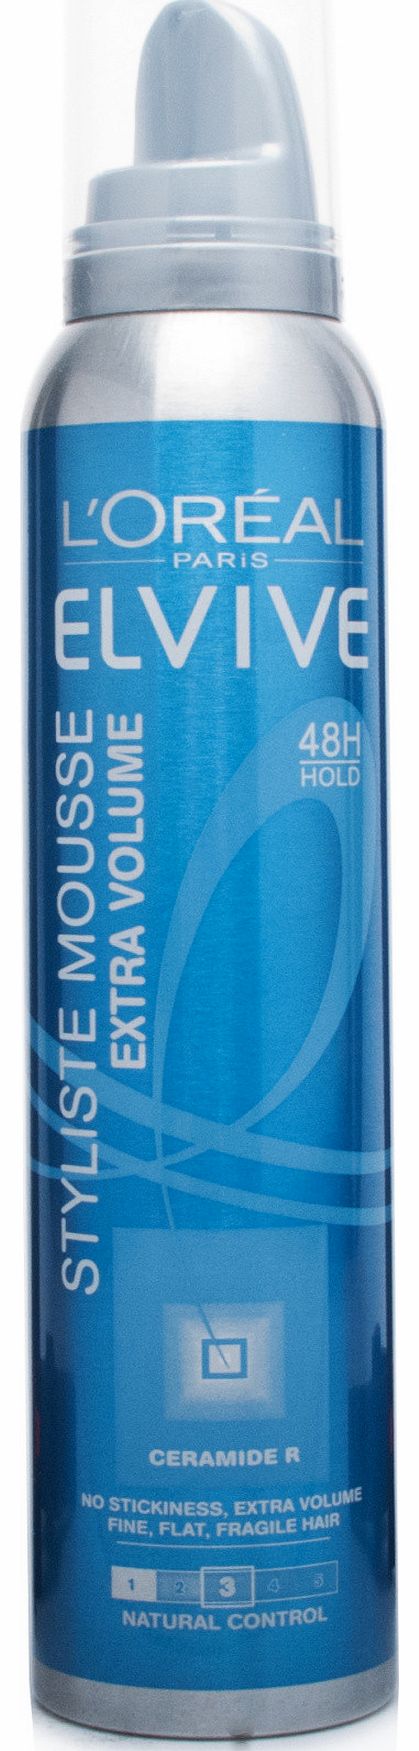 L'Oreal Elvive Styliste Mousse Extra Volume